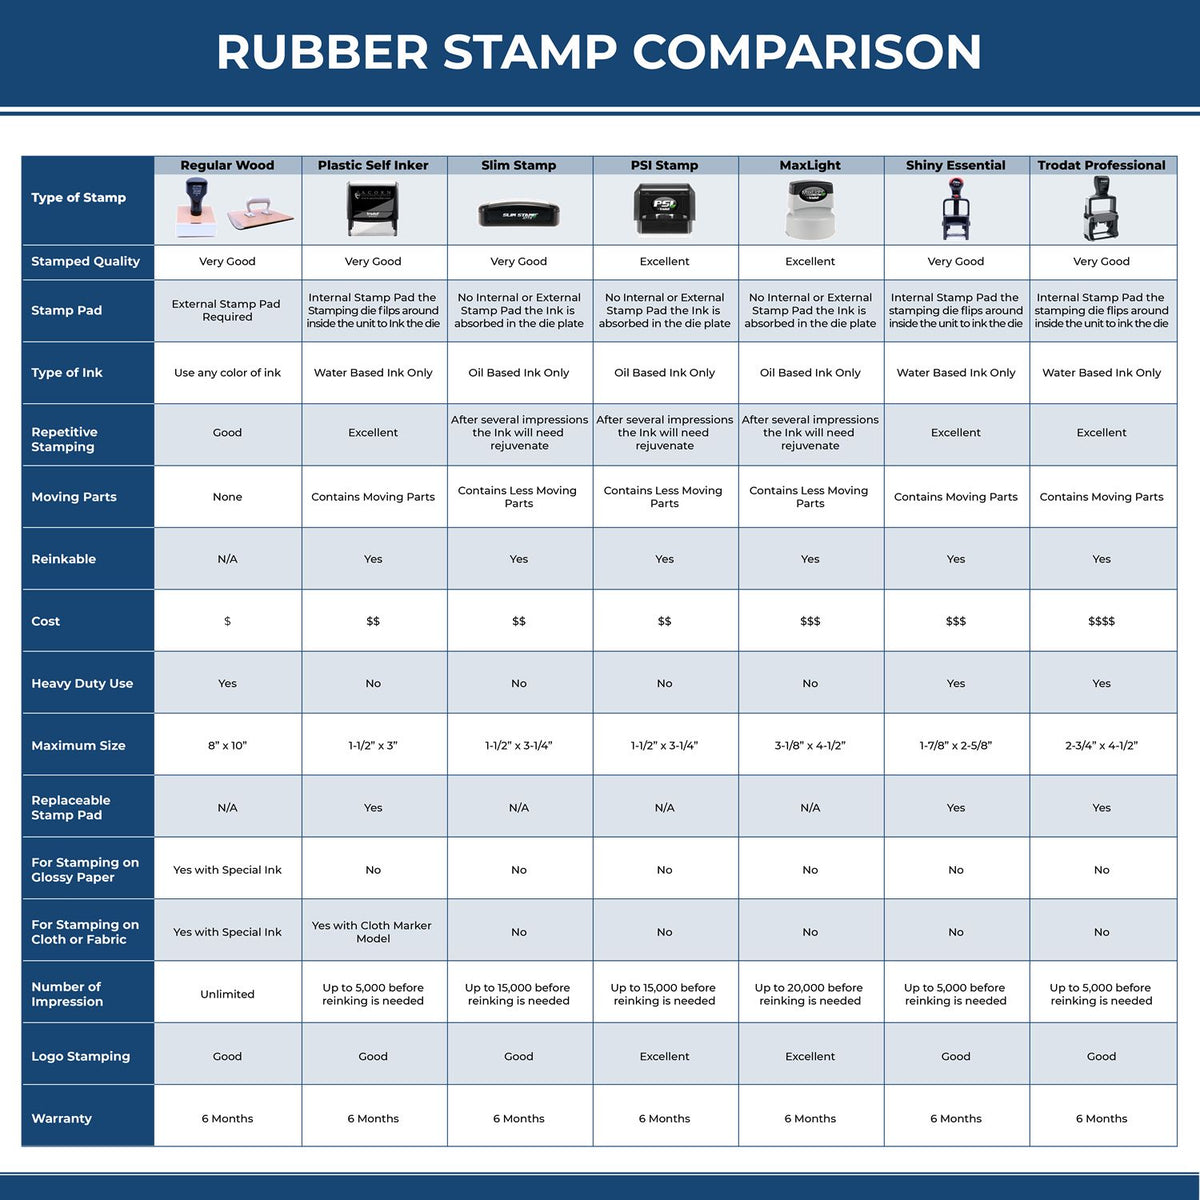 Paid with Checkmark Rubber Stamp 4827R Rubber Stamp Comparison